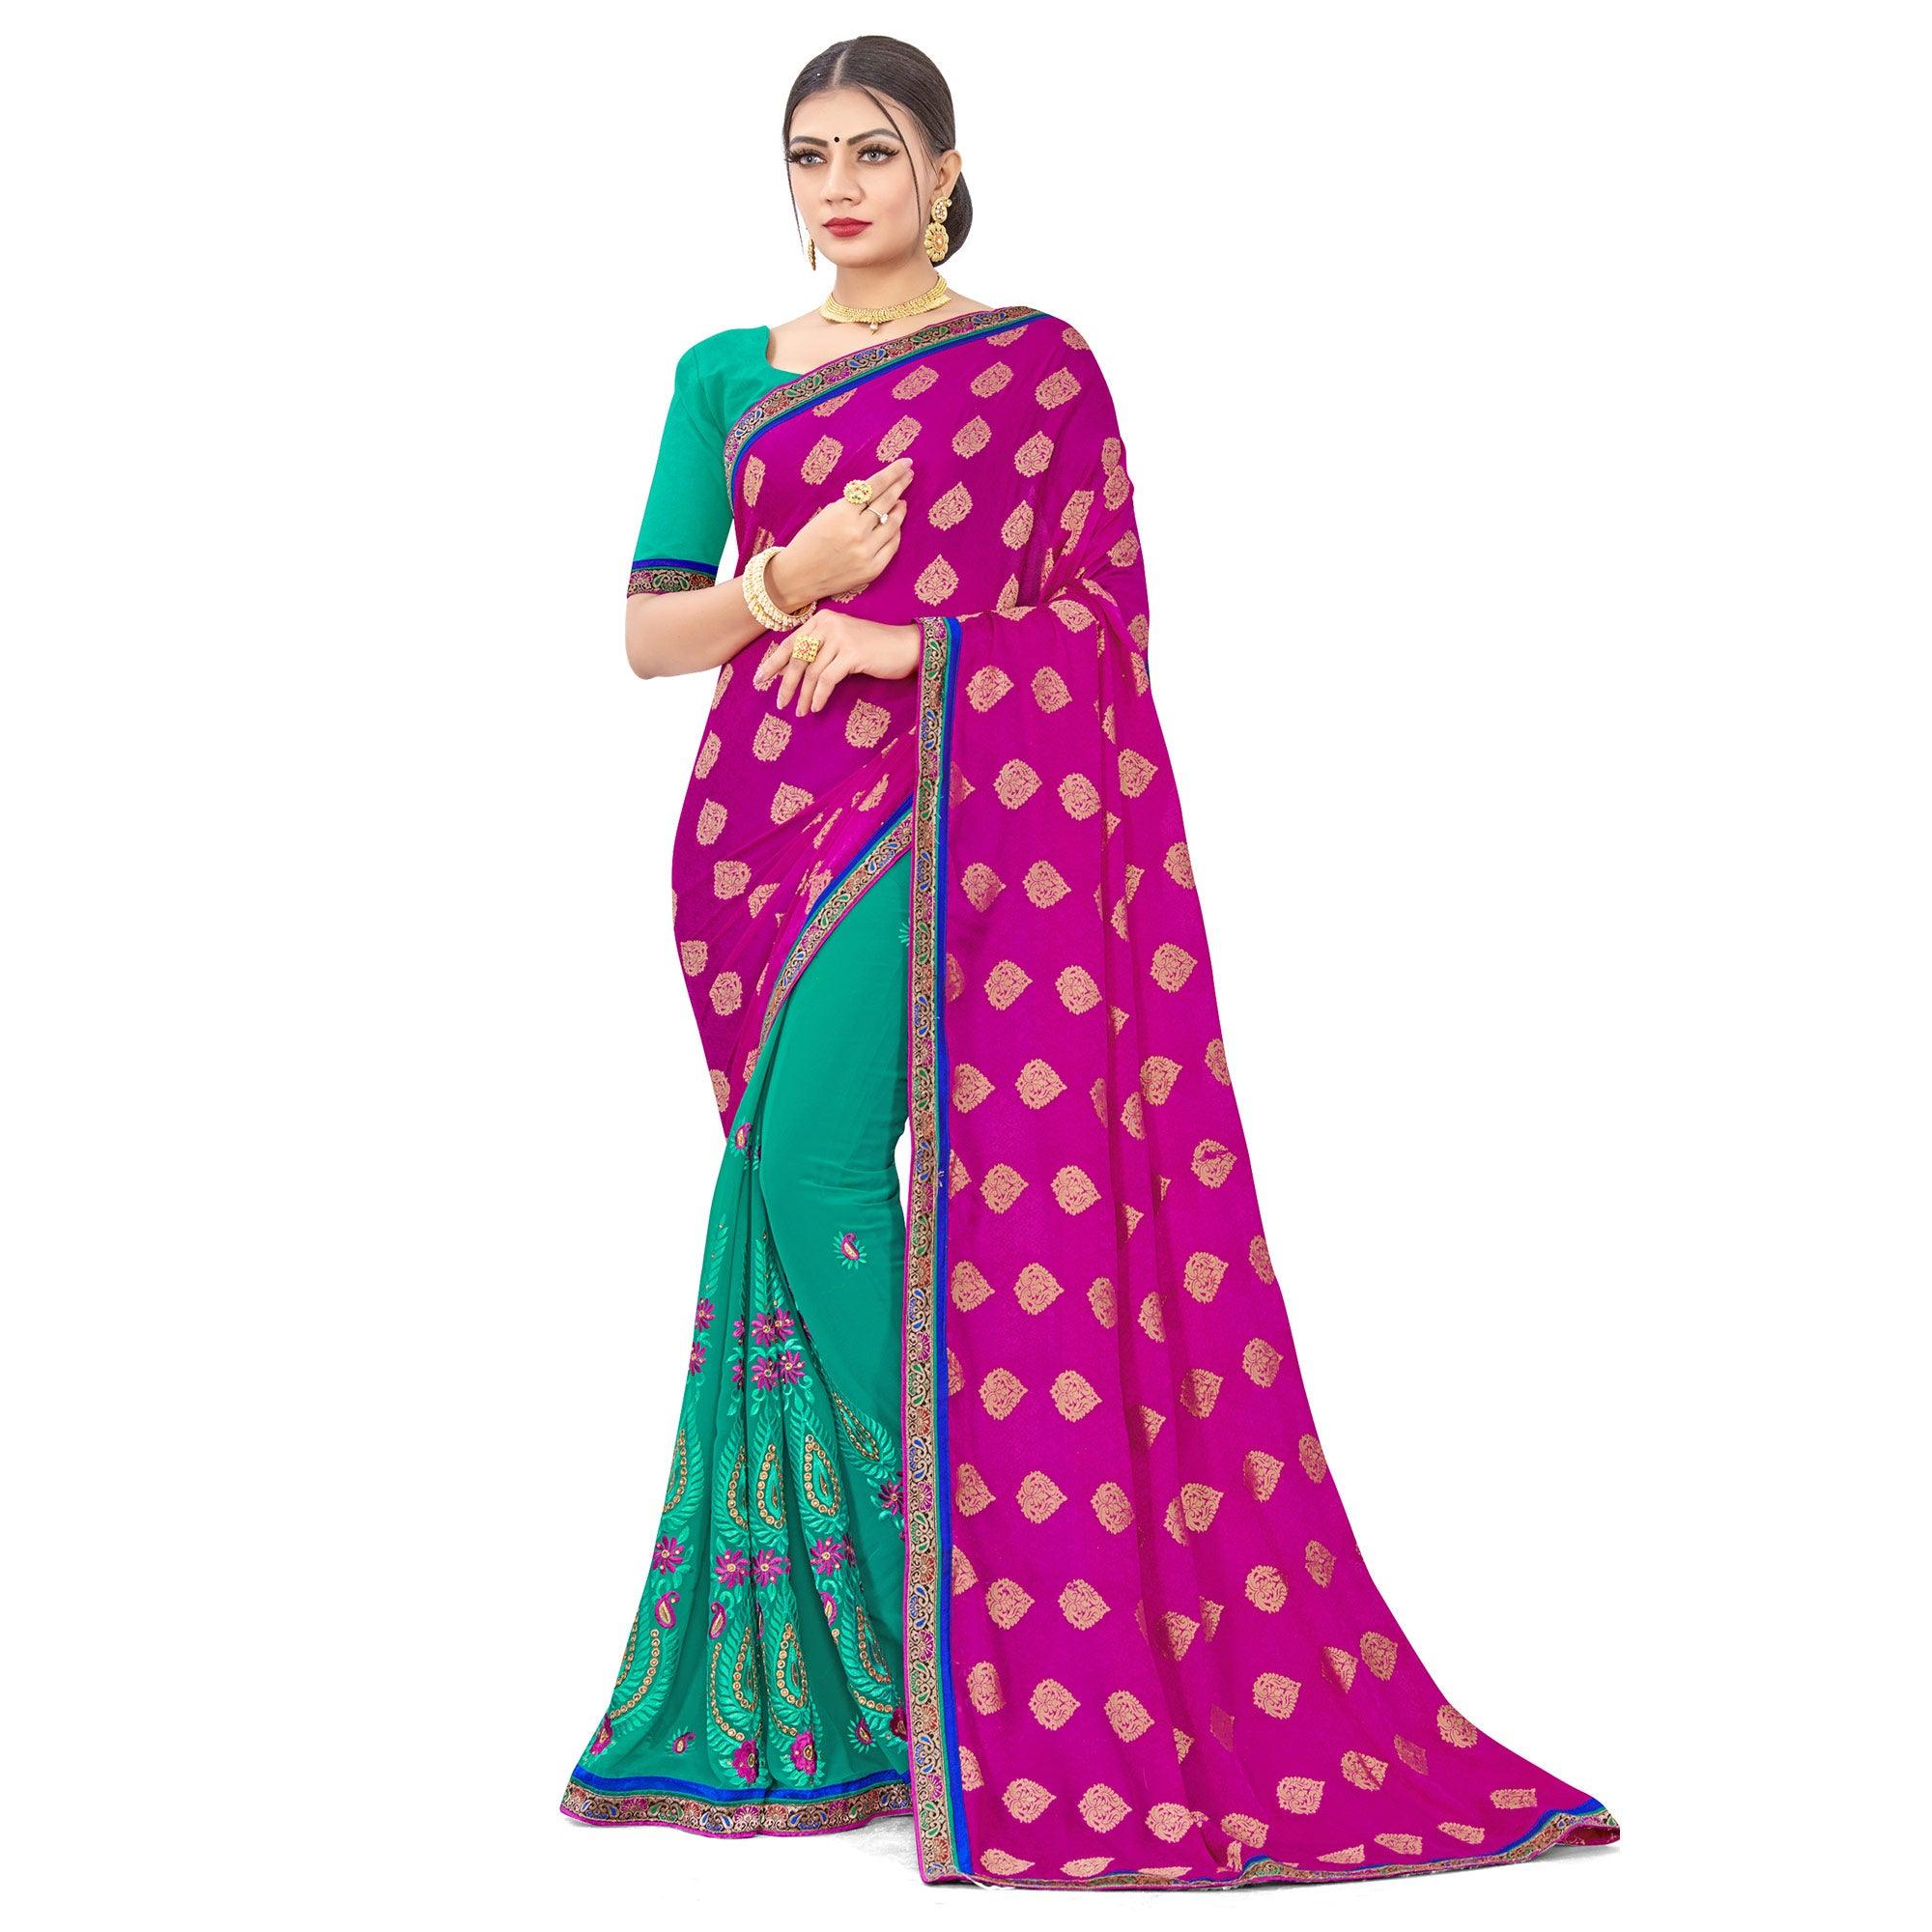 Captivating Pink-Turquoise Colored party Wear Embroidered Georgette Half-Half Saree - Peachmode